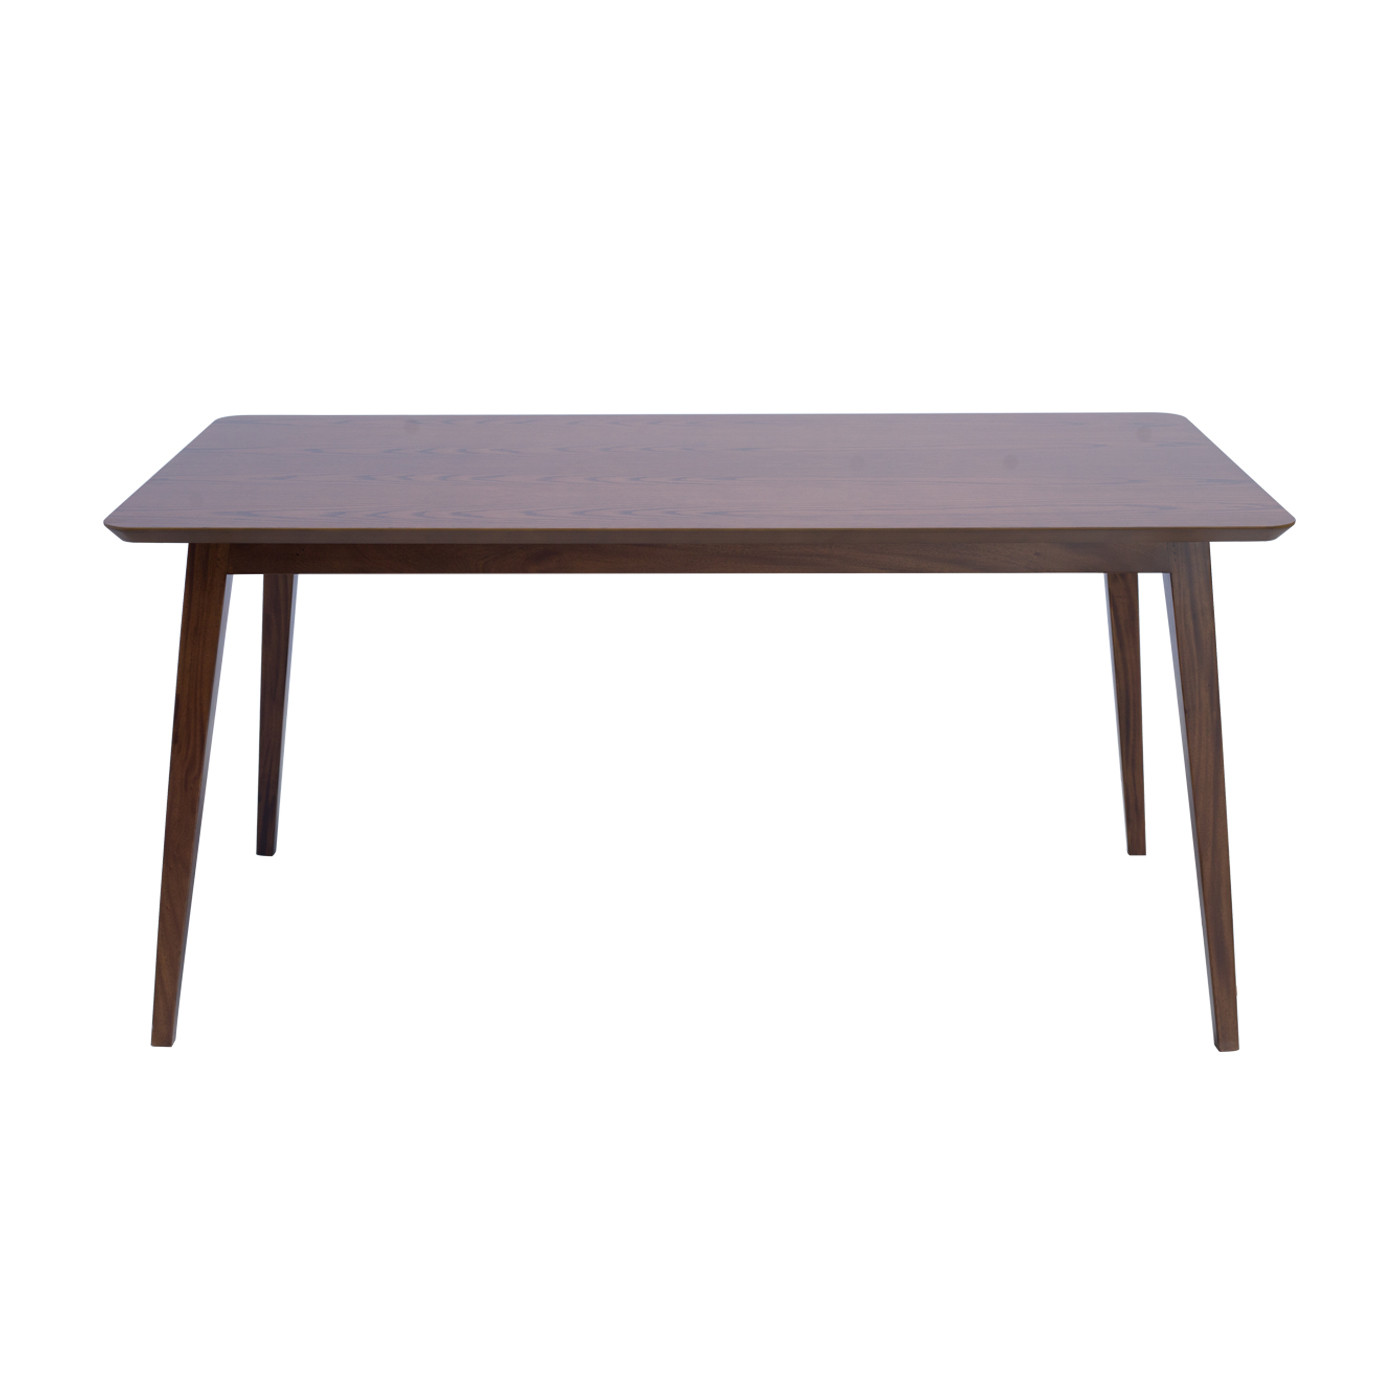 Muko Six Seater Dining Table